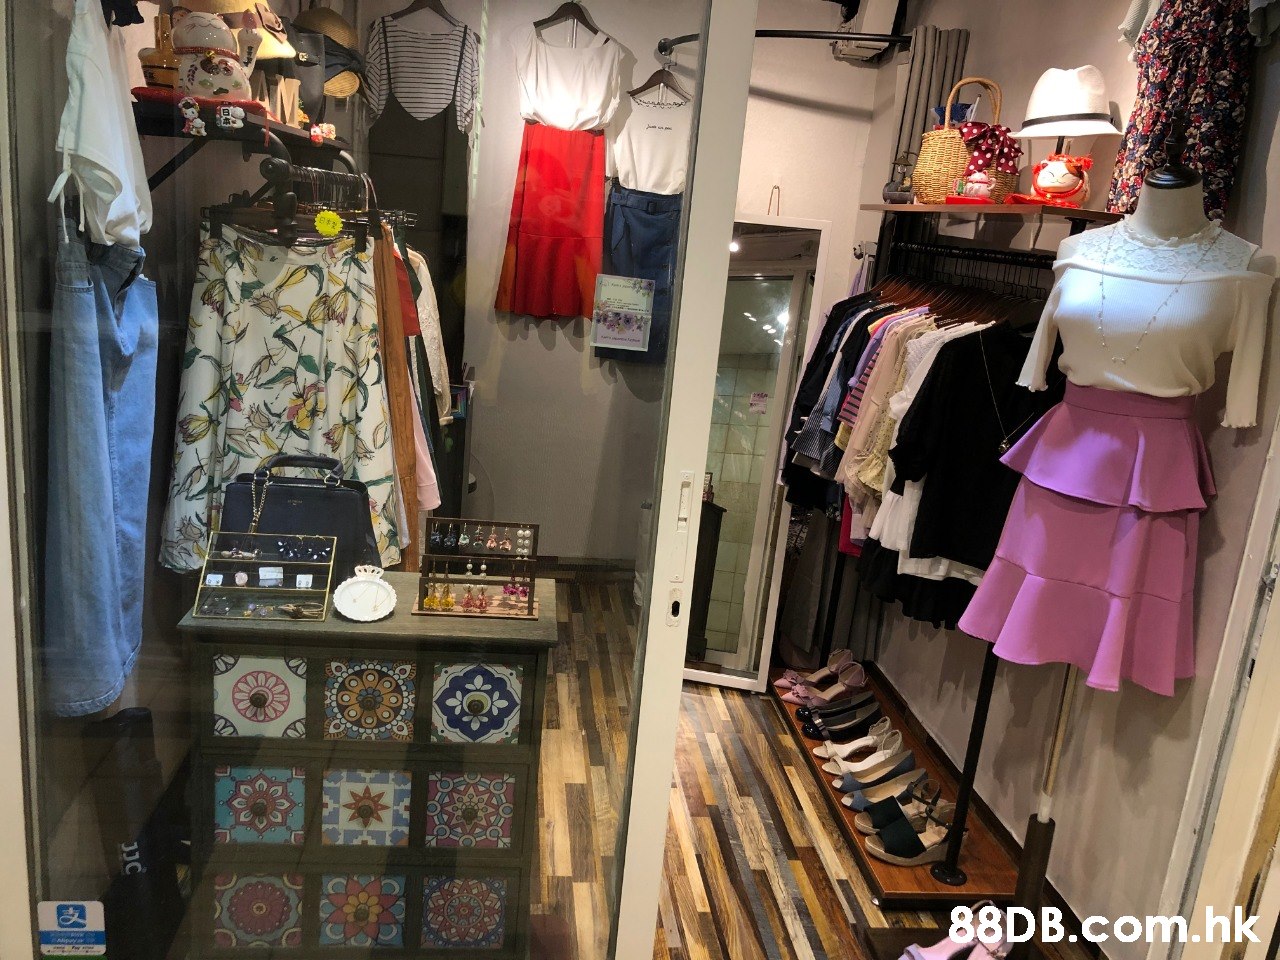 8DB.com.hk  Boutique,Clothing,Room,Fashion,Outlet store